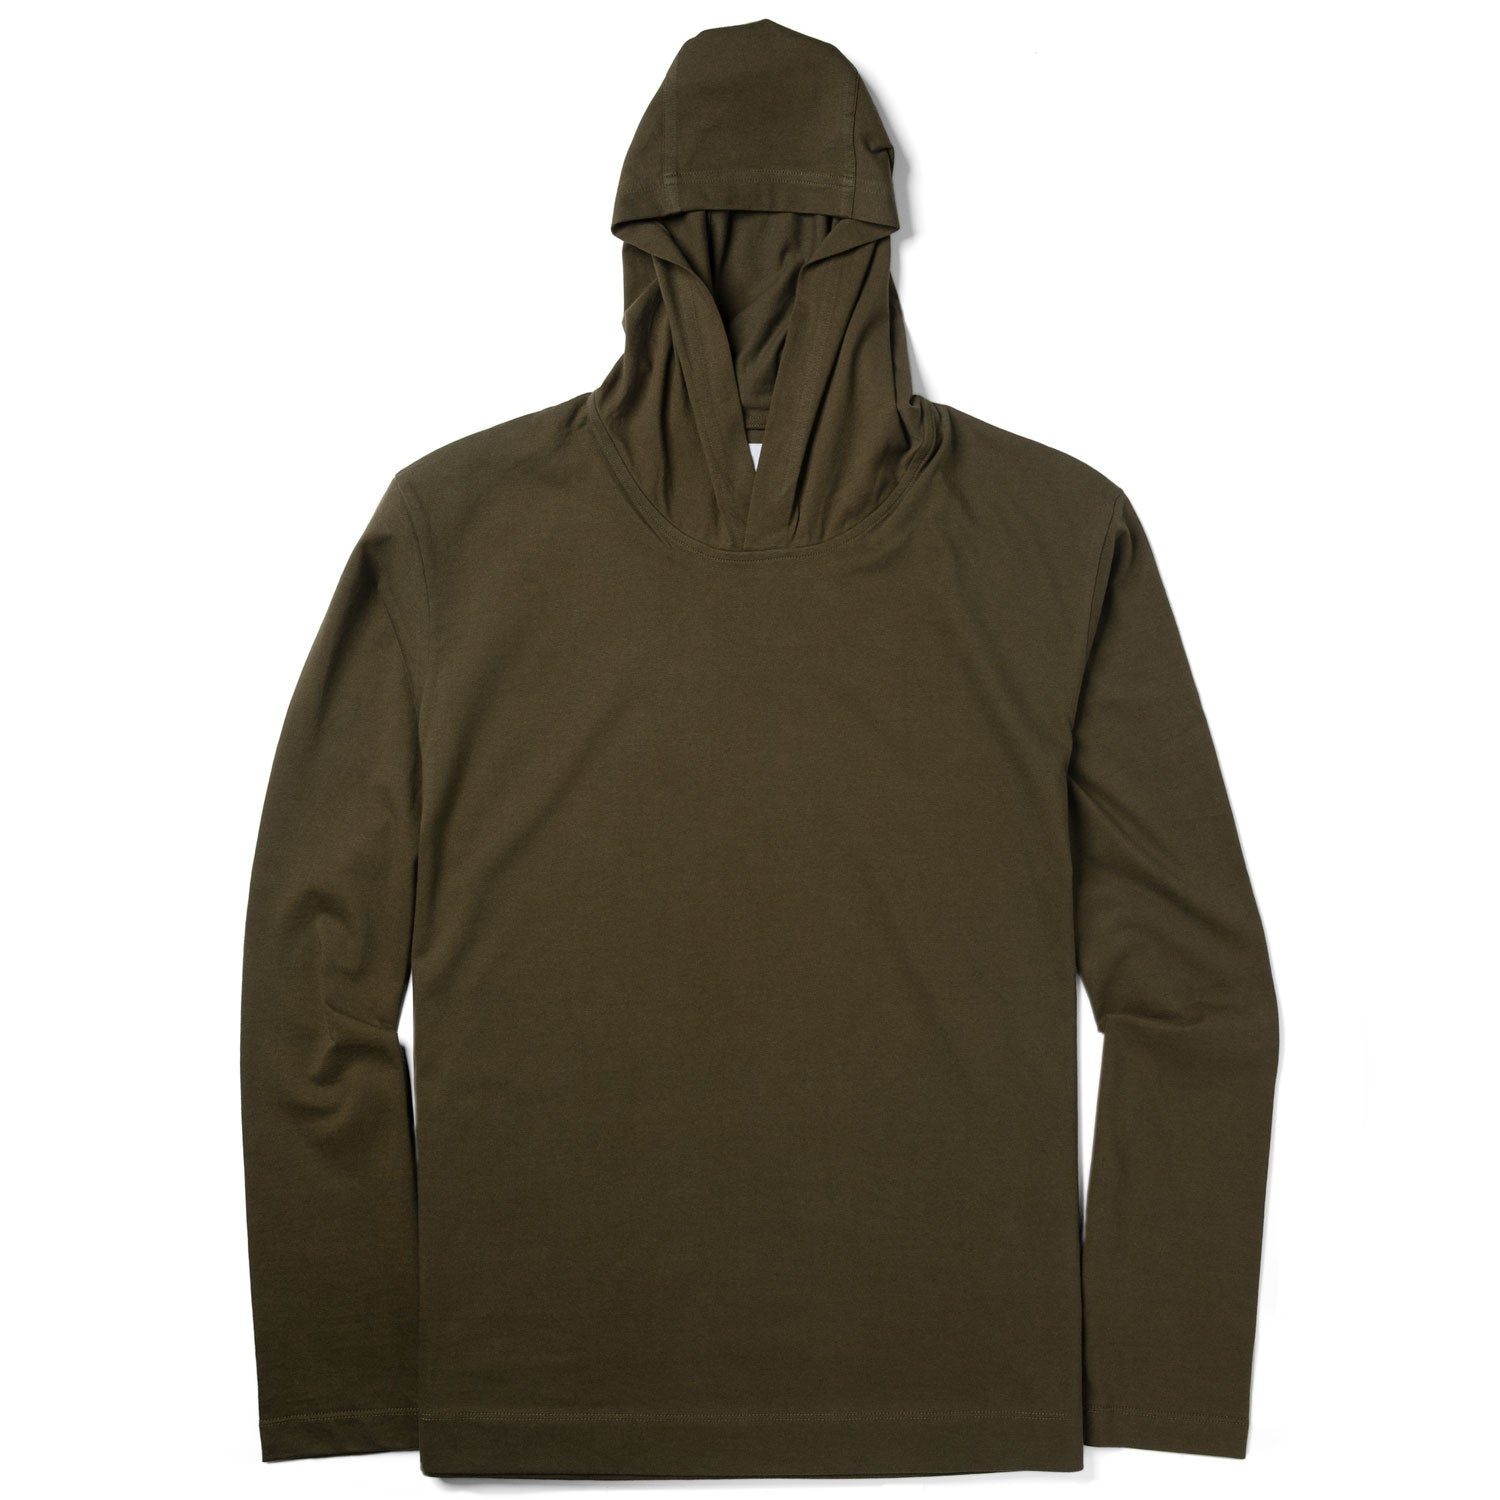 Essential T-Hoodie –  Olive Green Cotton Jersey